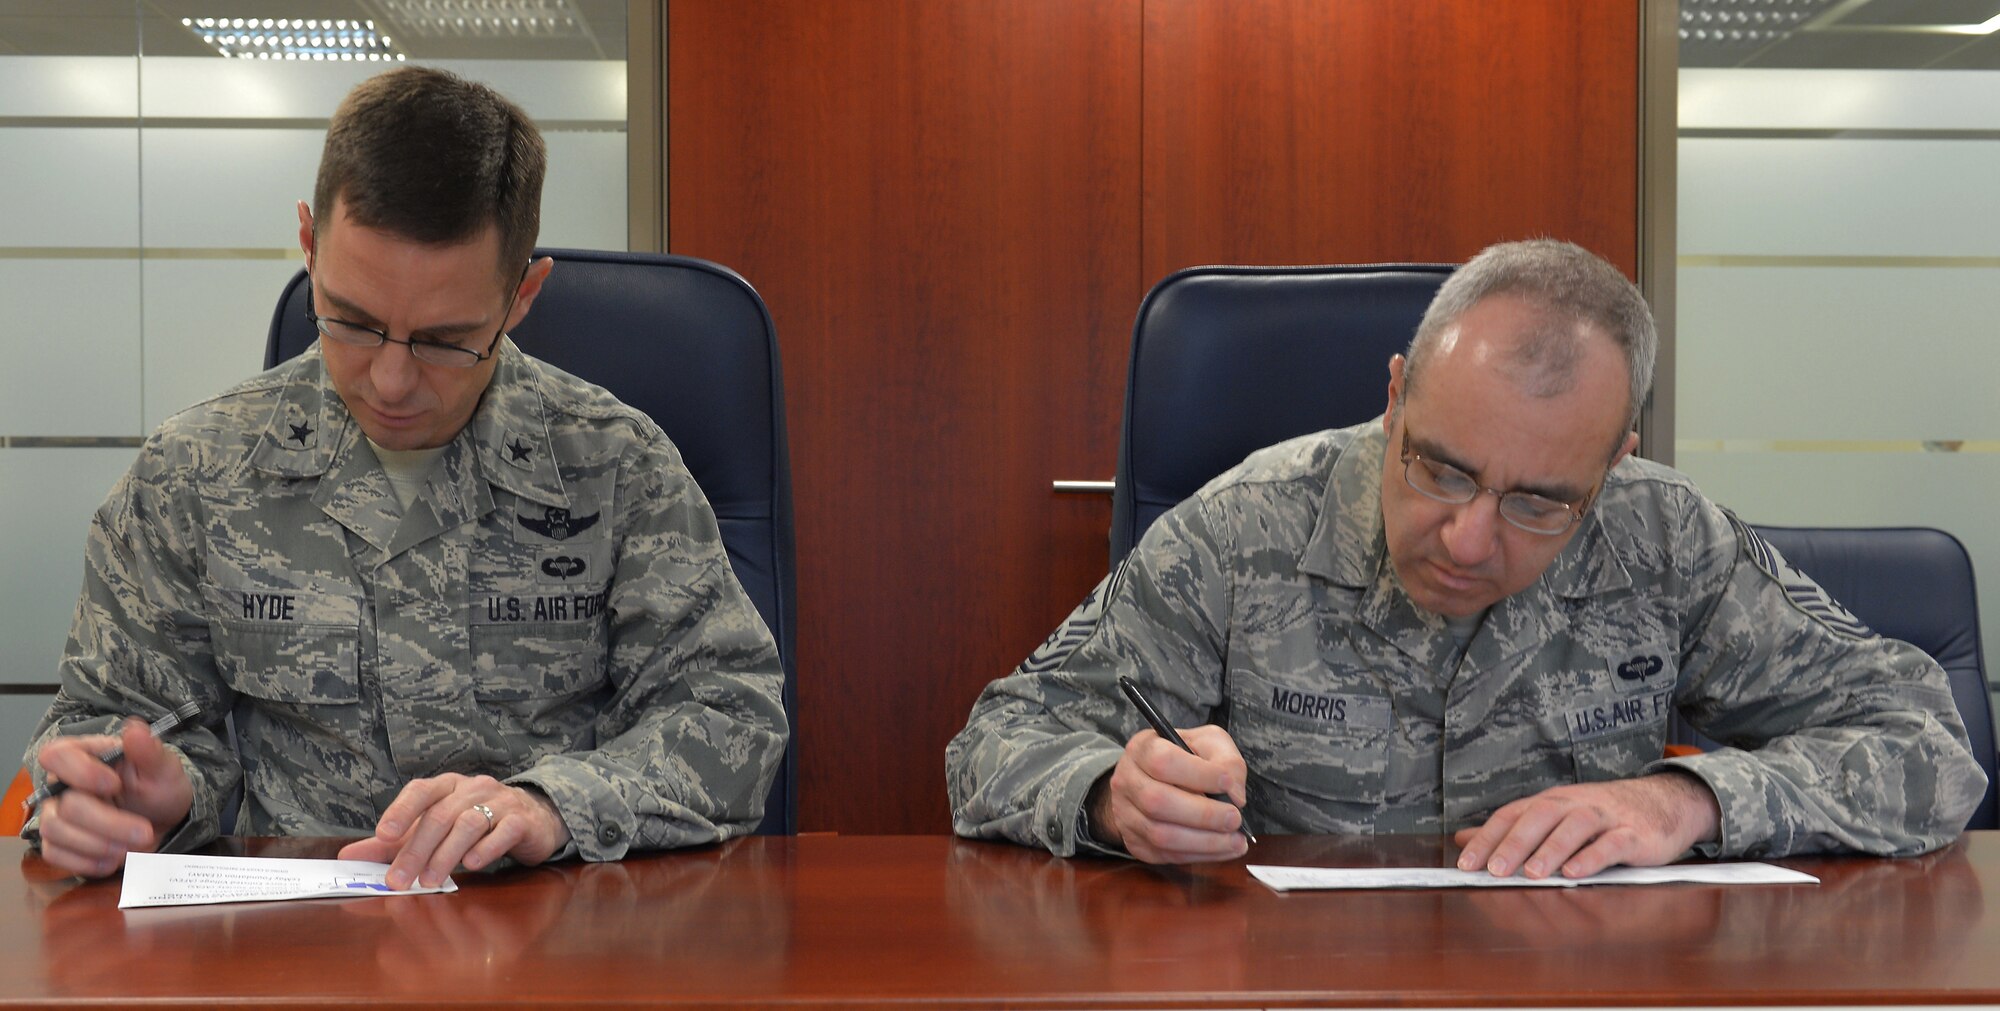 Brig. Gen. C. K. Hyde, 86th Airlift Wing commander, and Chief Master Sgt. James Morris, 86th AW command chief, fill out an Air Force Assistance Fund form on Ramstein Air Base, Germany, April 3, 2013. The AFAF was established to provide assistance through donations to organizations charged with helping Airmen and their families. (U.S. Air Force photo/Airman 1st Class Holly Cook) 